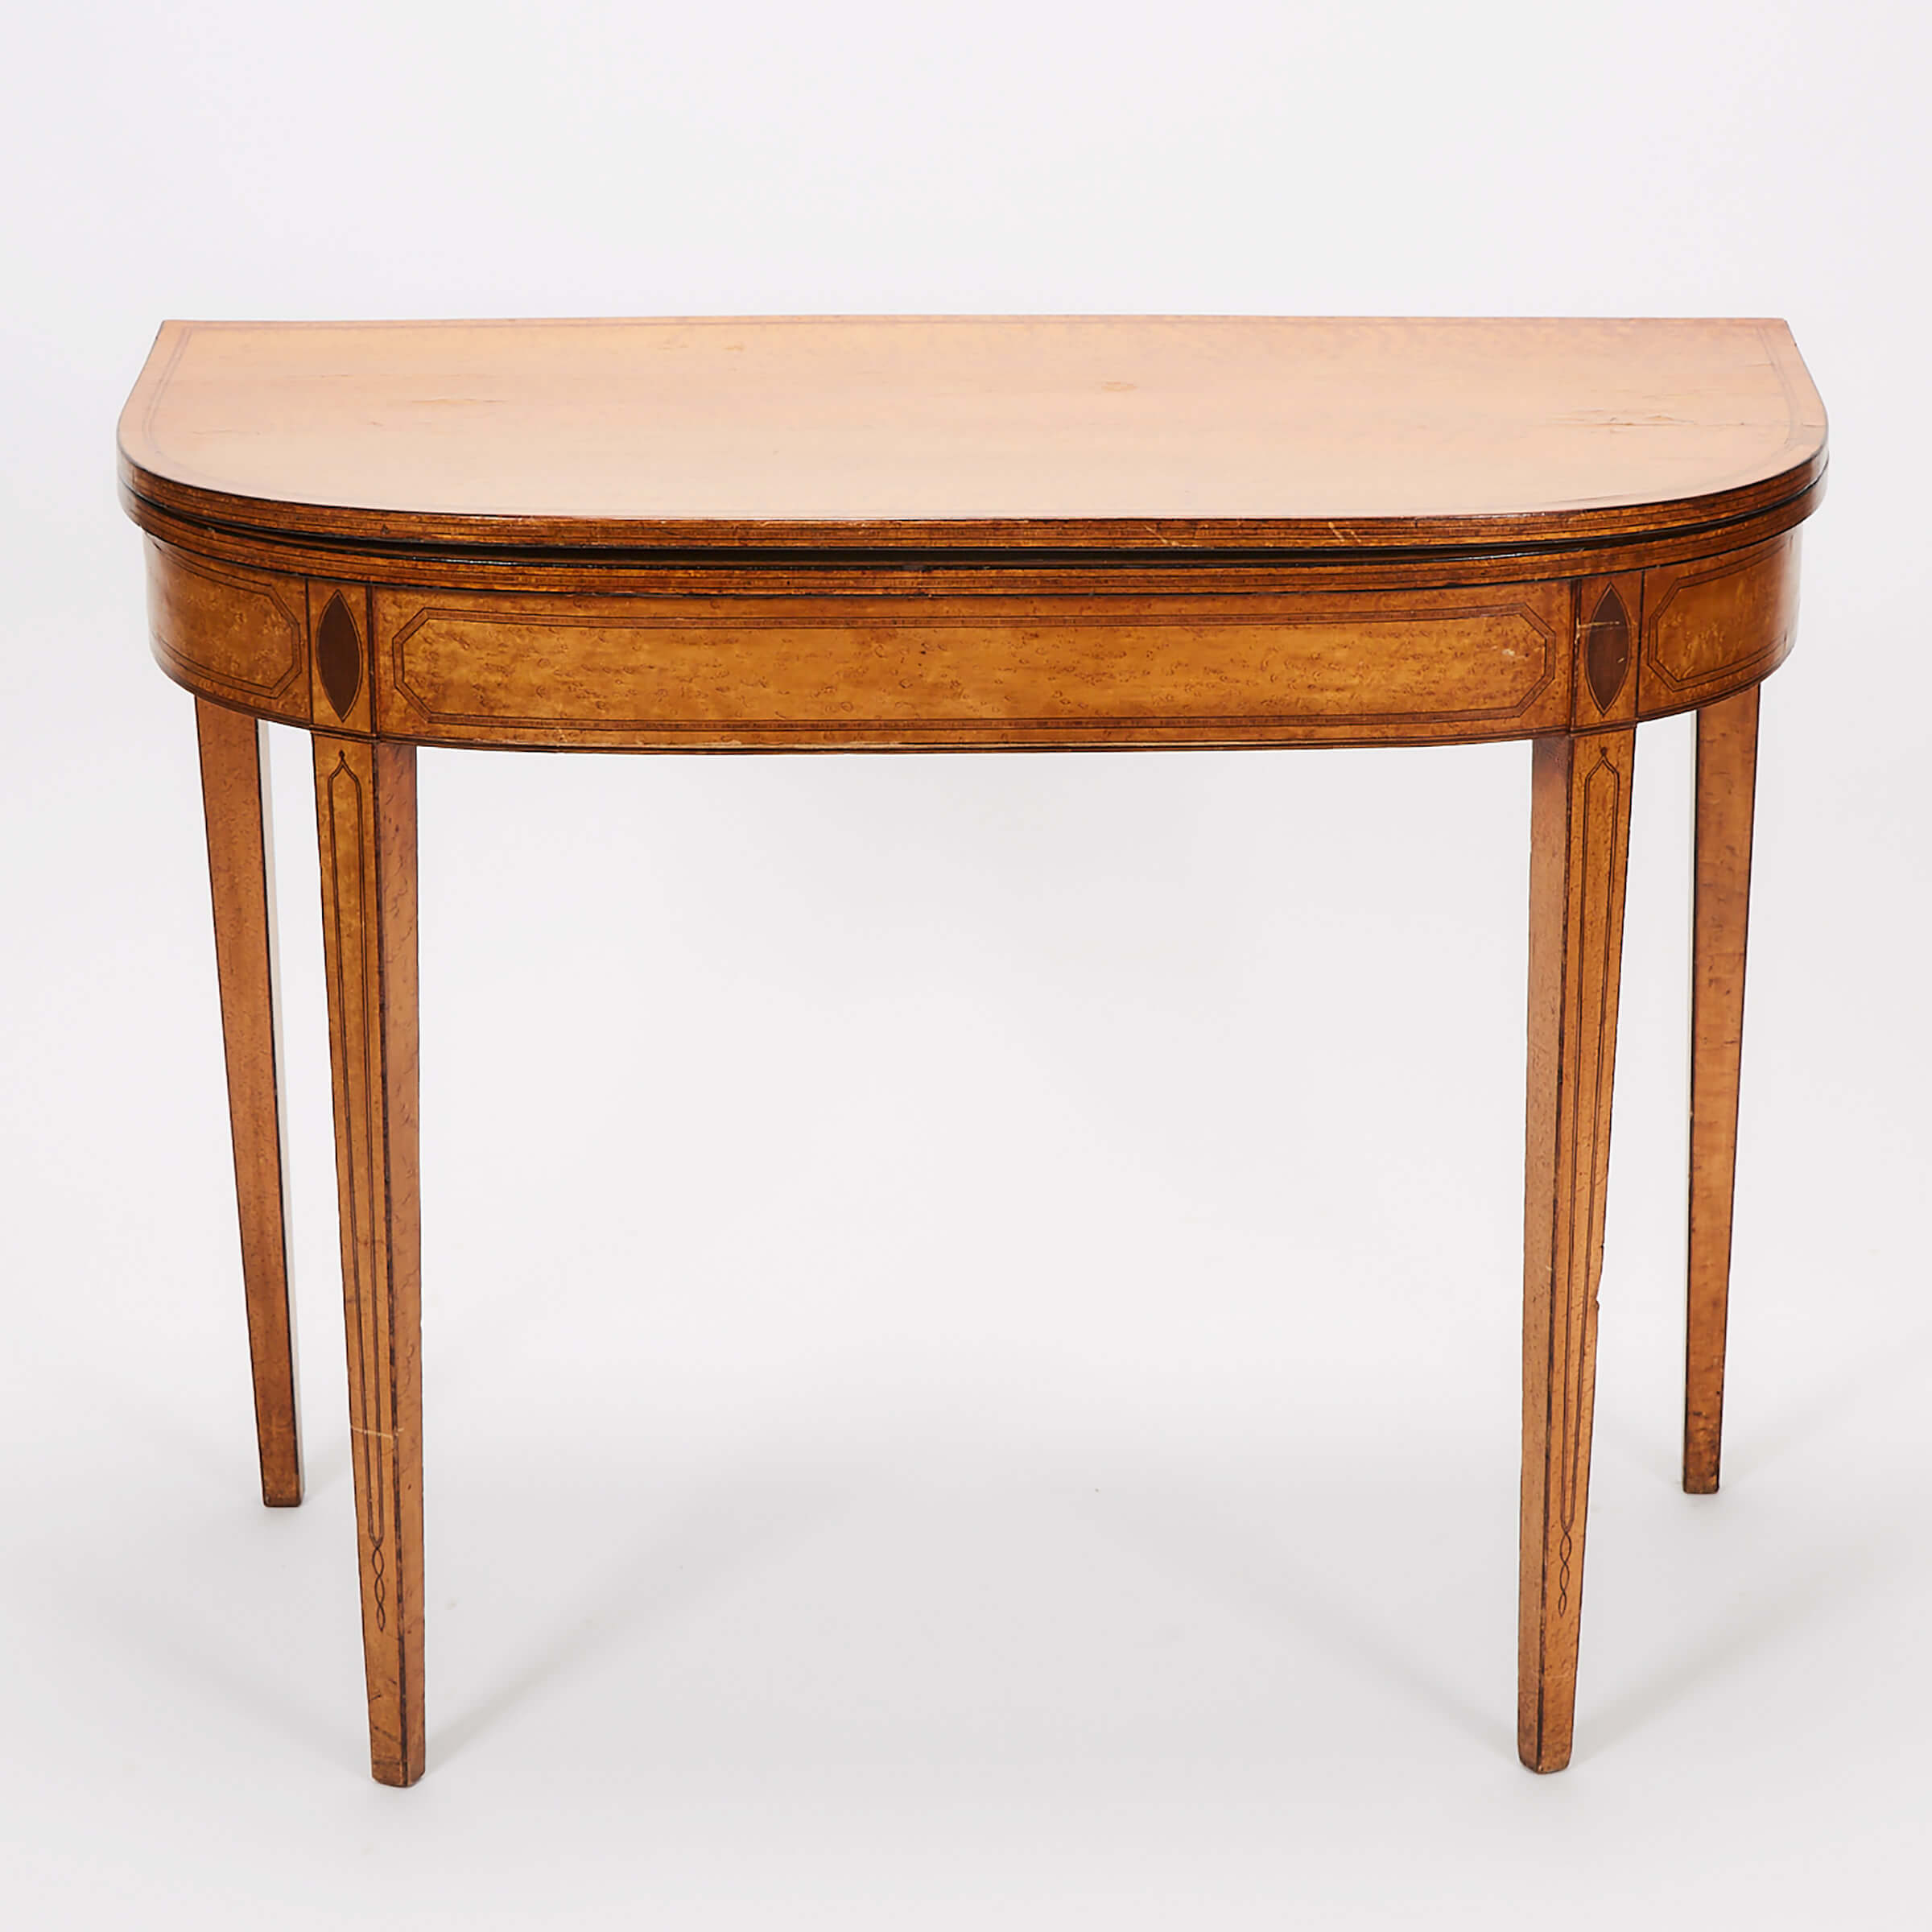 Hepplewhite Style Bird’s Eye Maple Games Table, early-mid 20th century